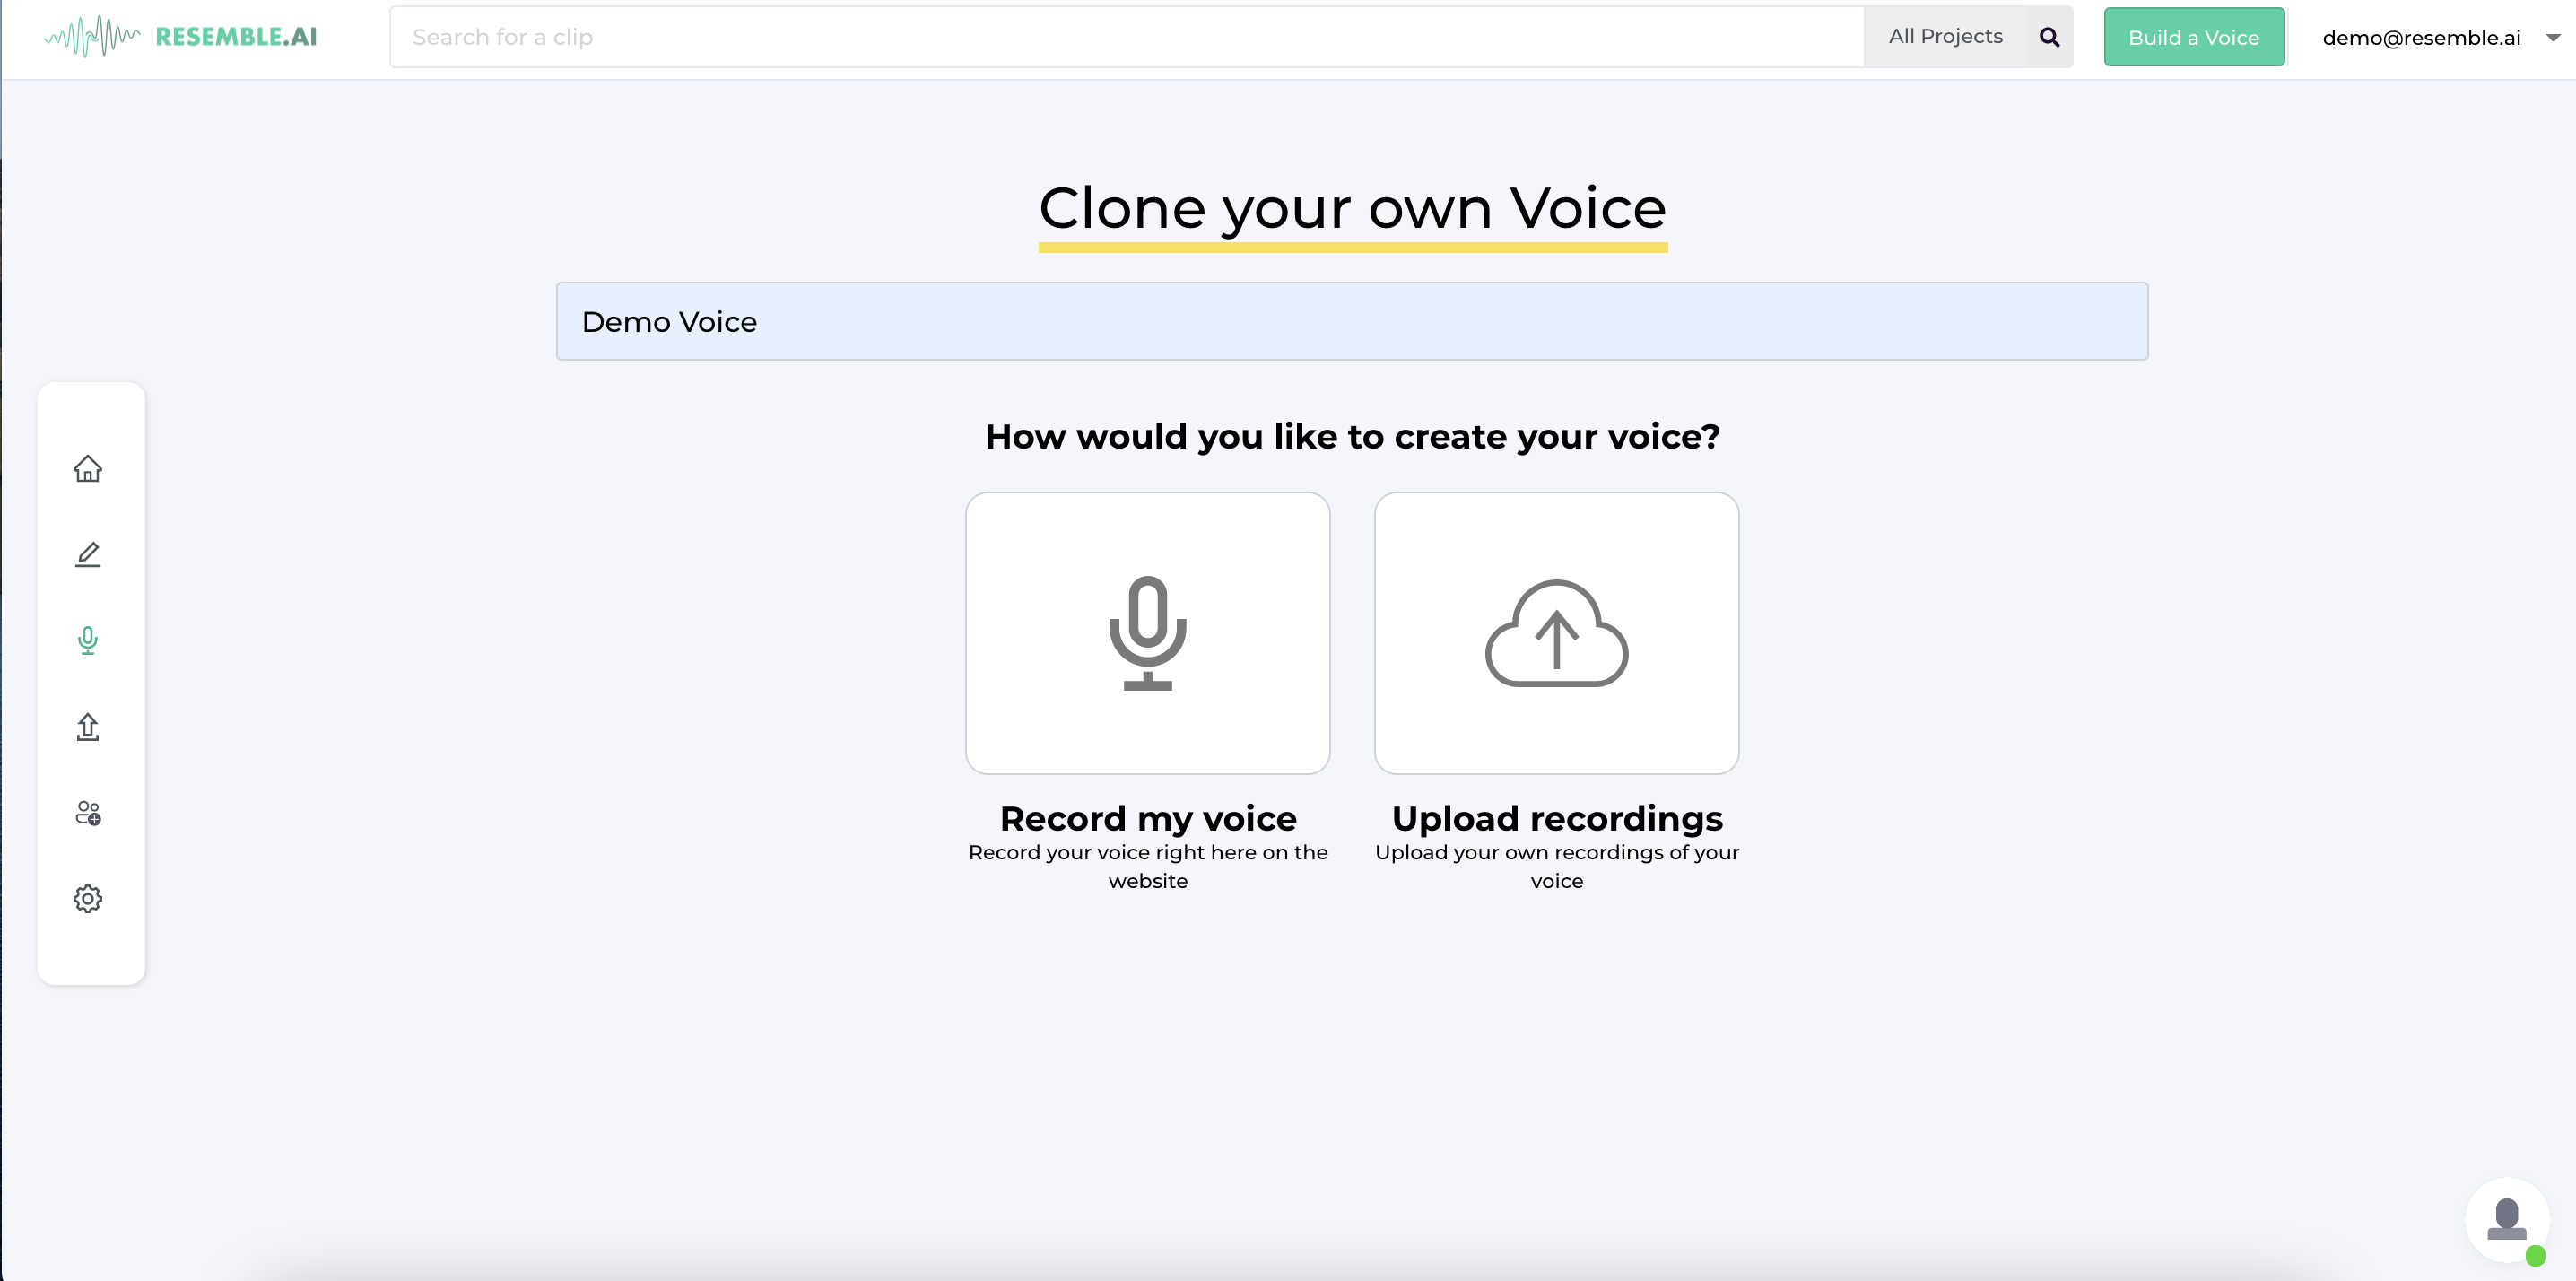 Clone your own voice with Resemble or upload existing audio recordings.